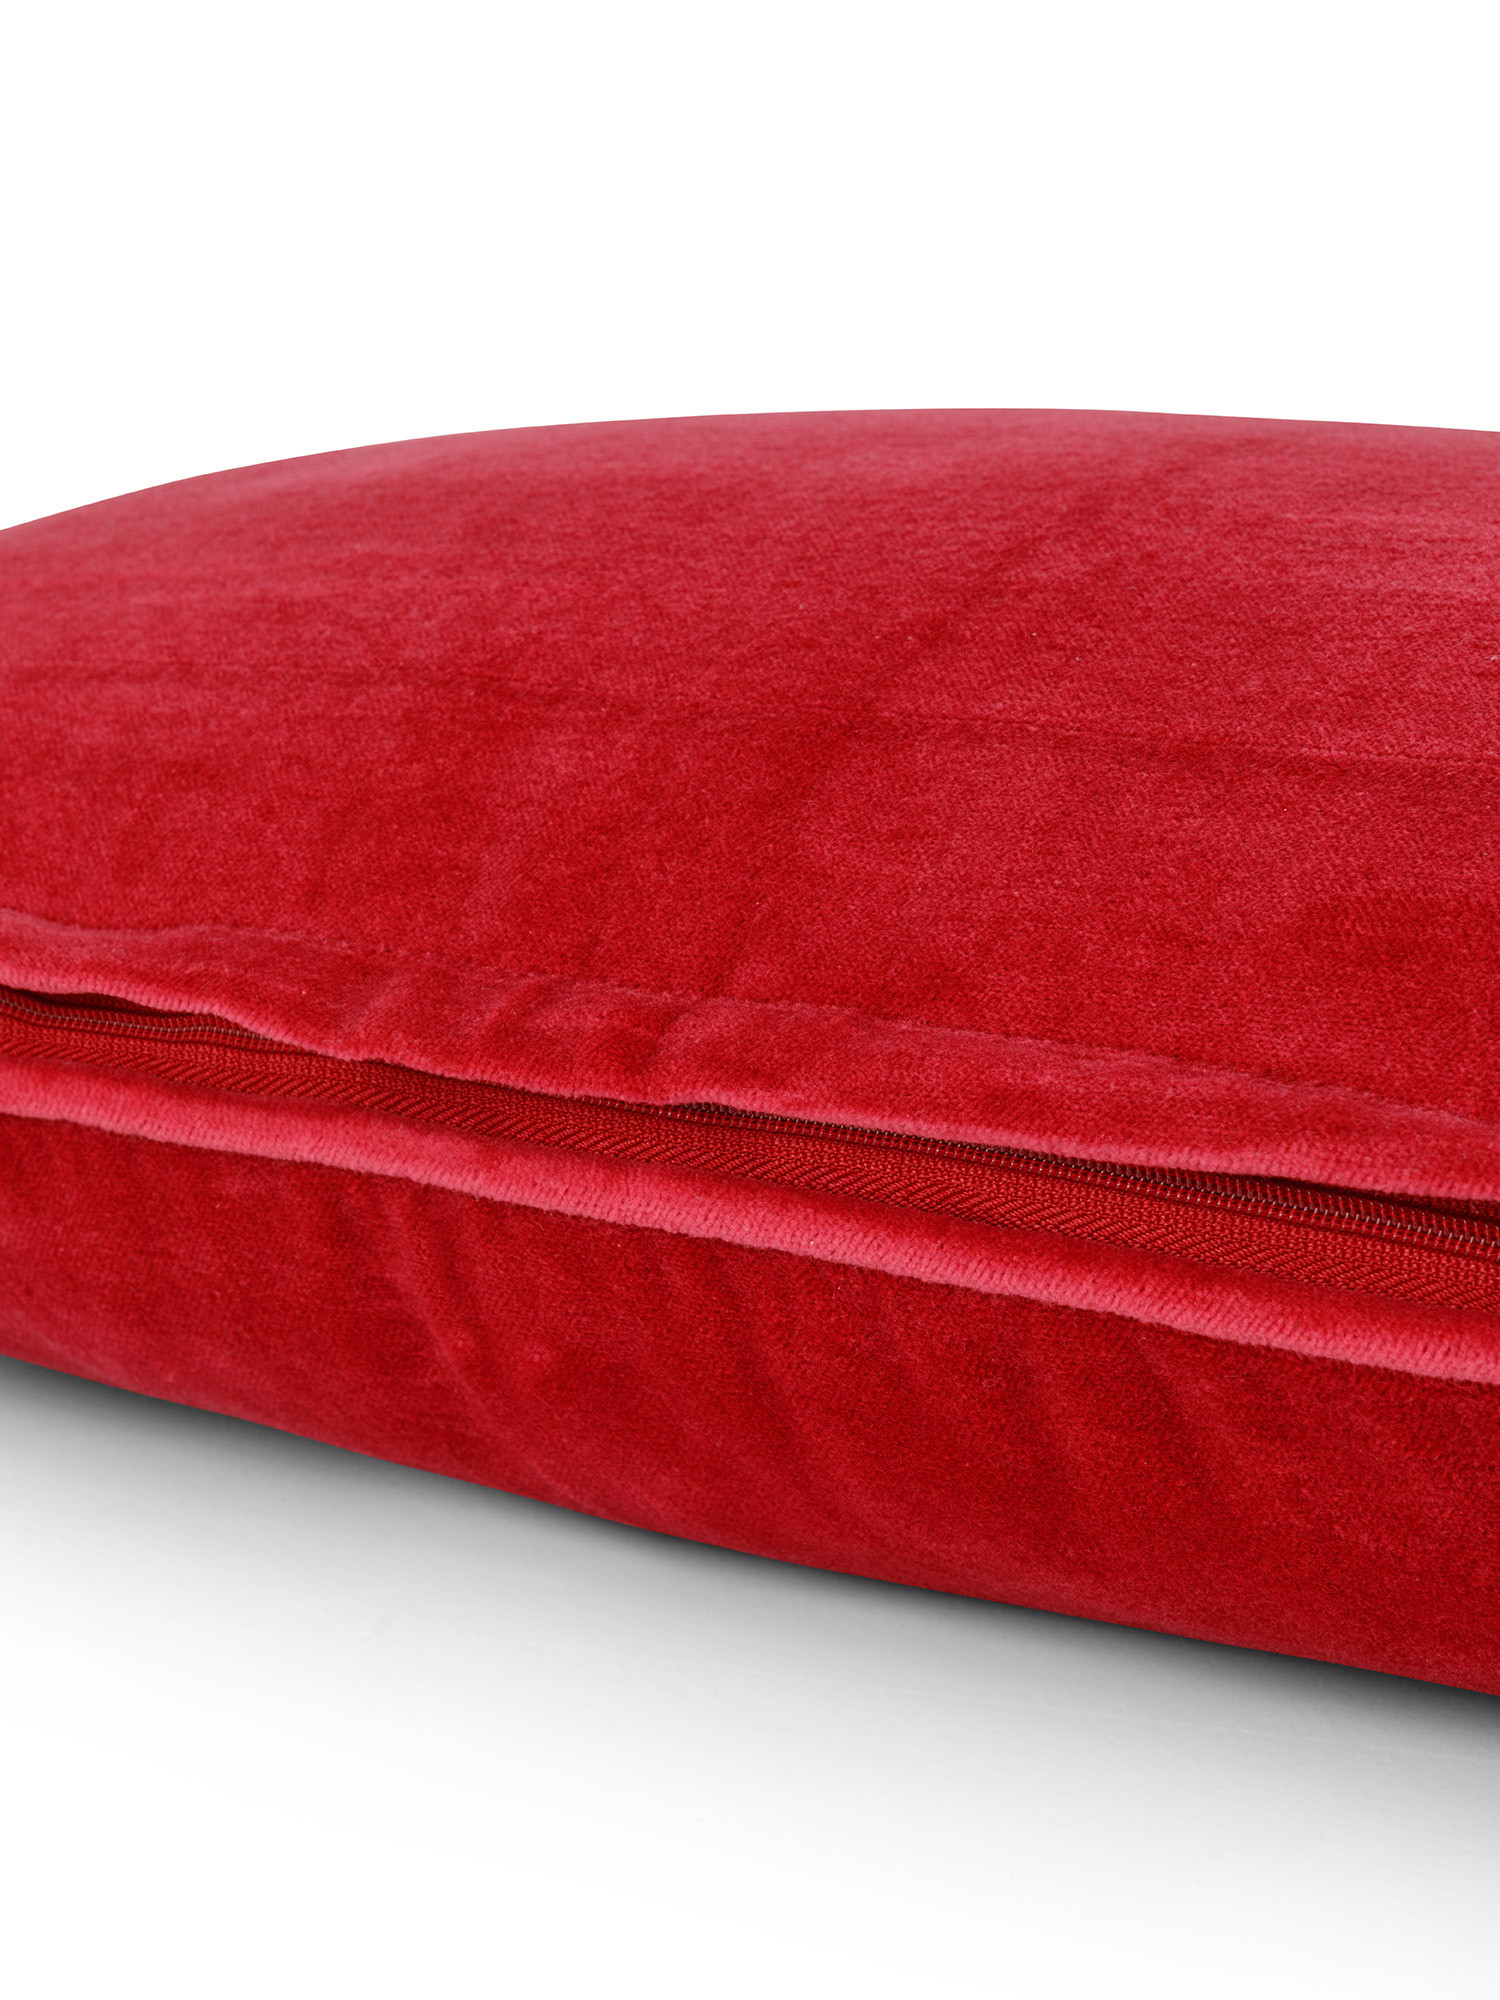 Velvet cushion with piping 35x55 cm, Red, large image number 1